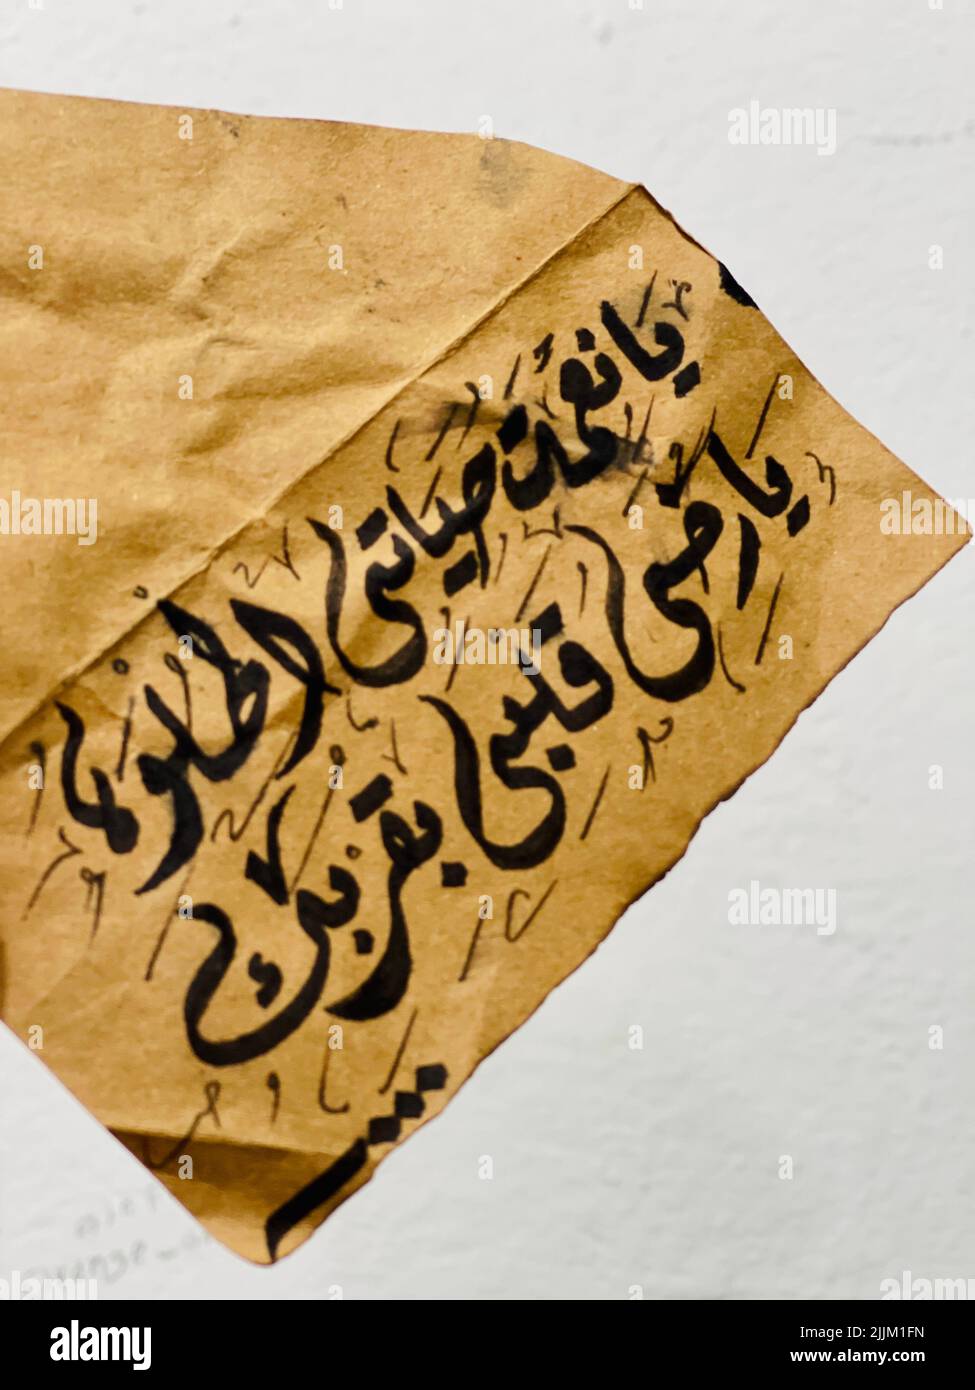 A vertical shot of Arabic calligraphy on an old, vintage paper Stock Photo